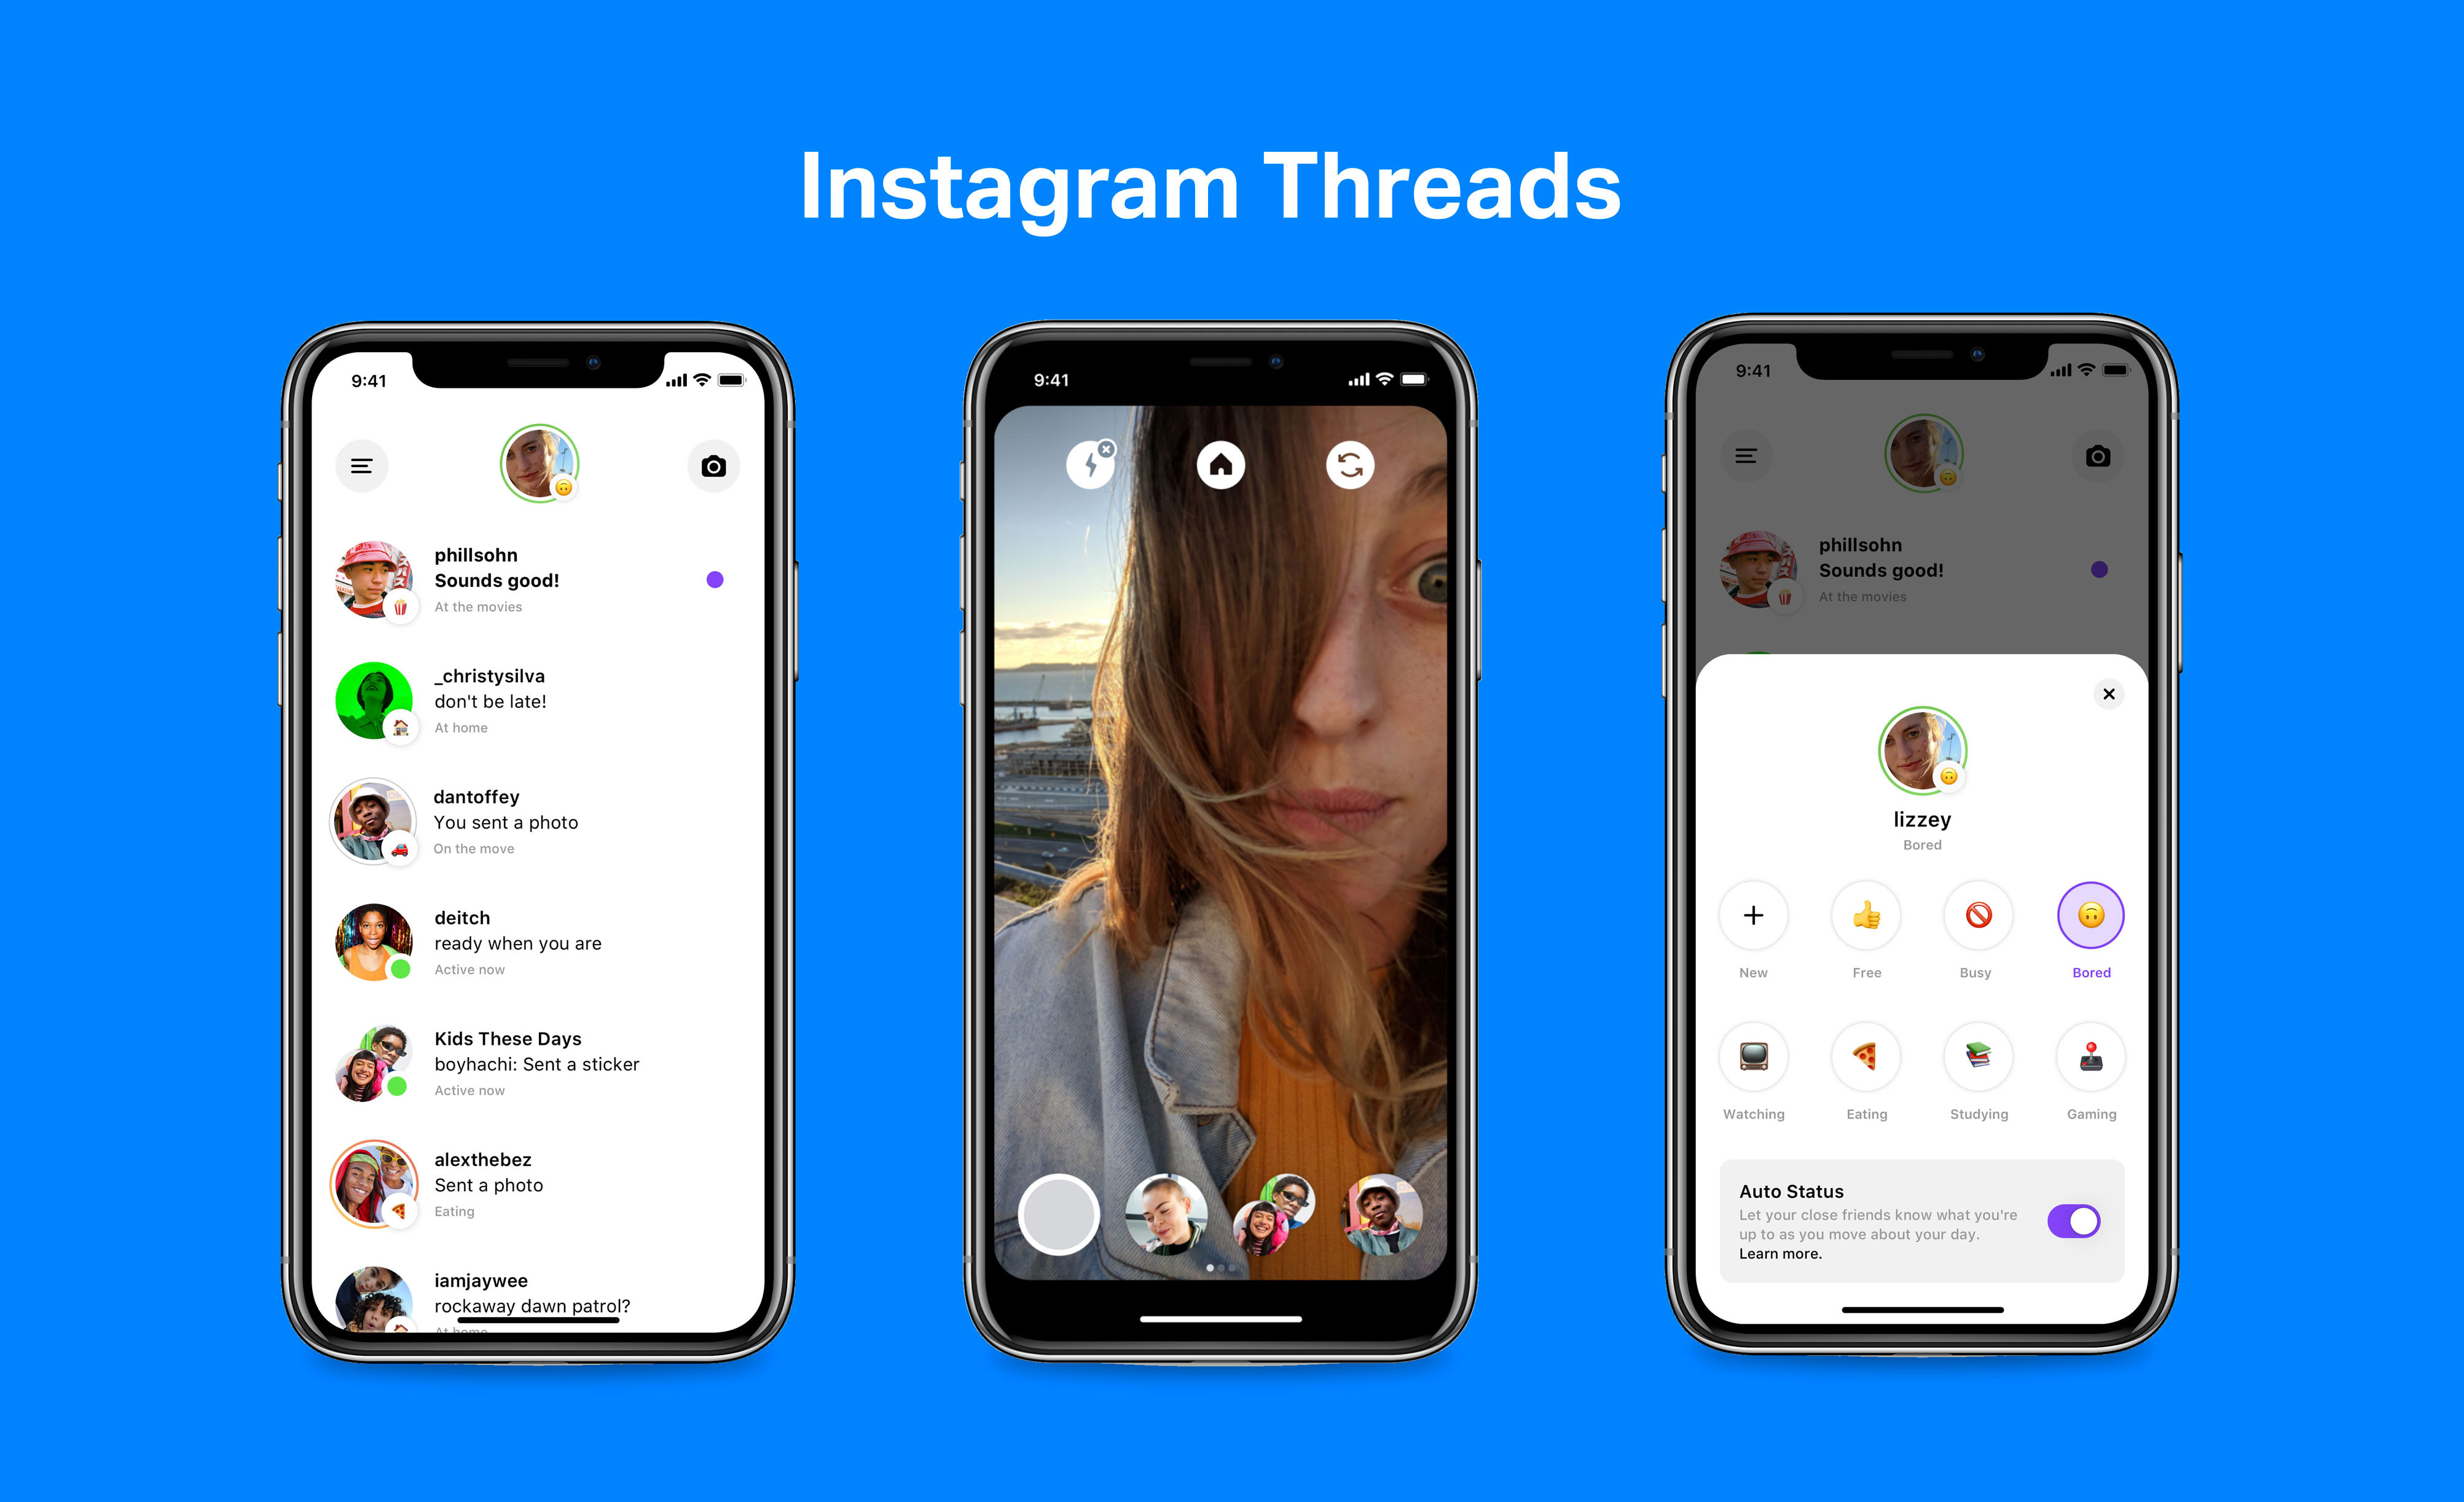 See How to Use and Download the App - Threads from Instagram